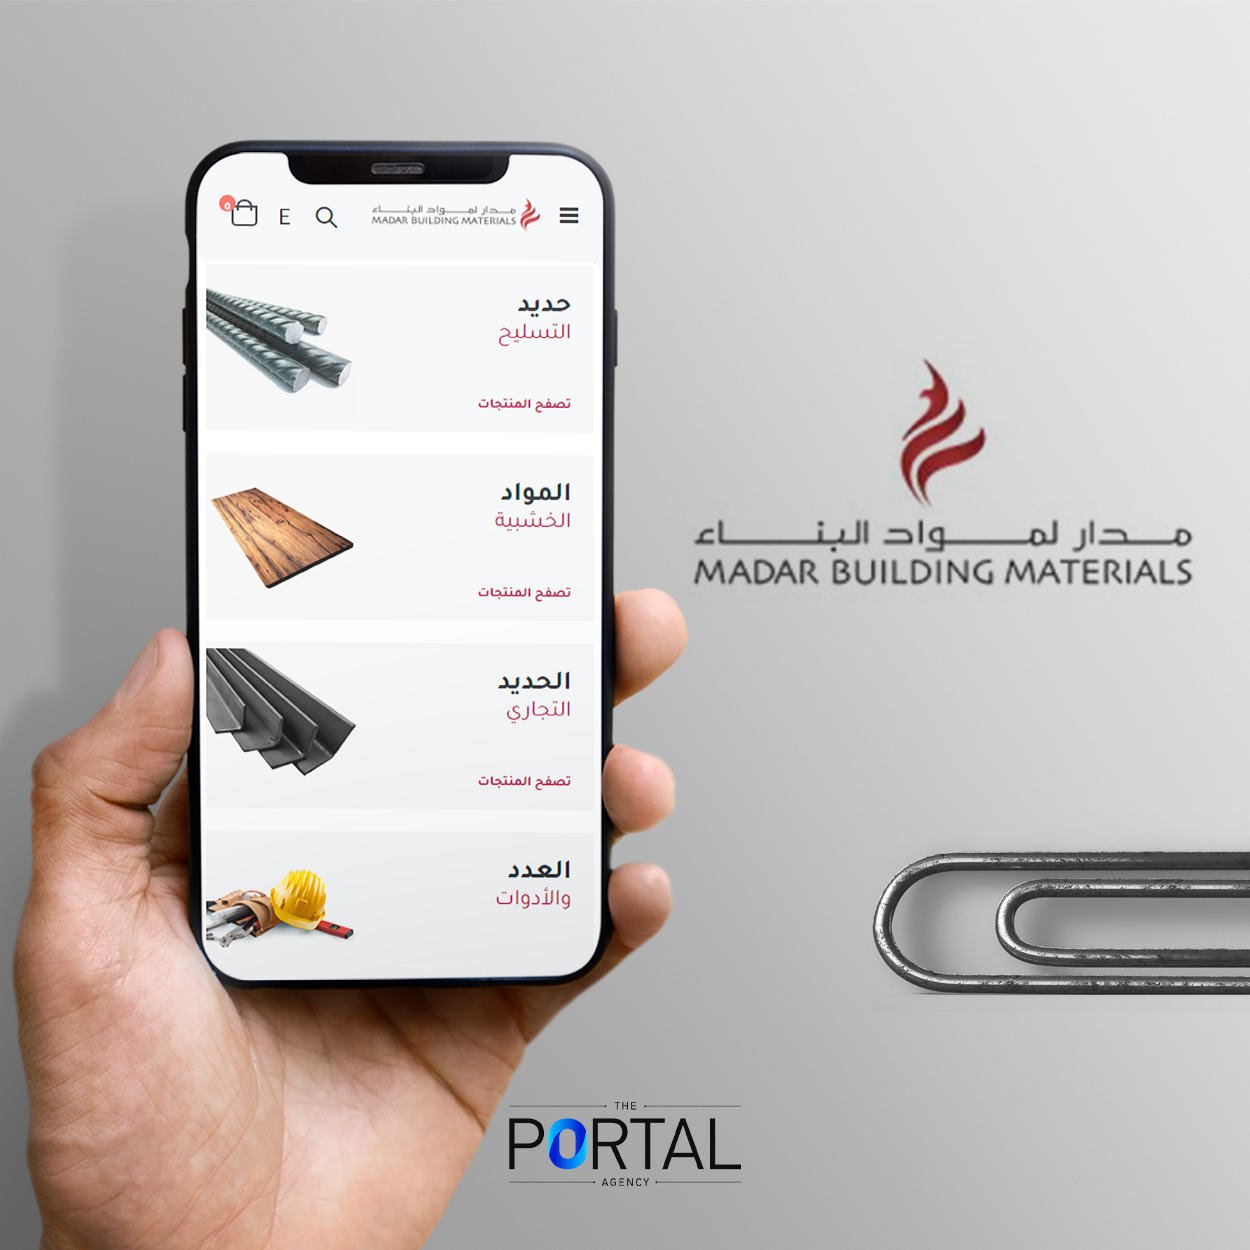 https://theportalagency.com/project/madar-emirates-for-building-materials-website/